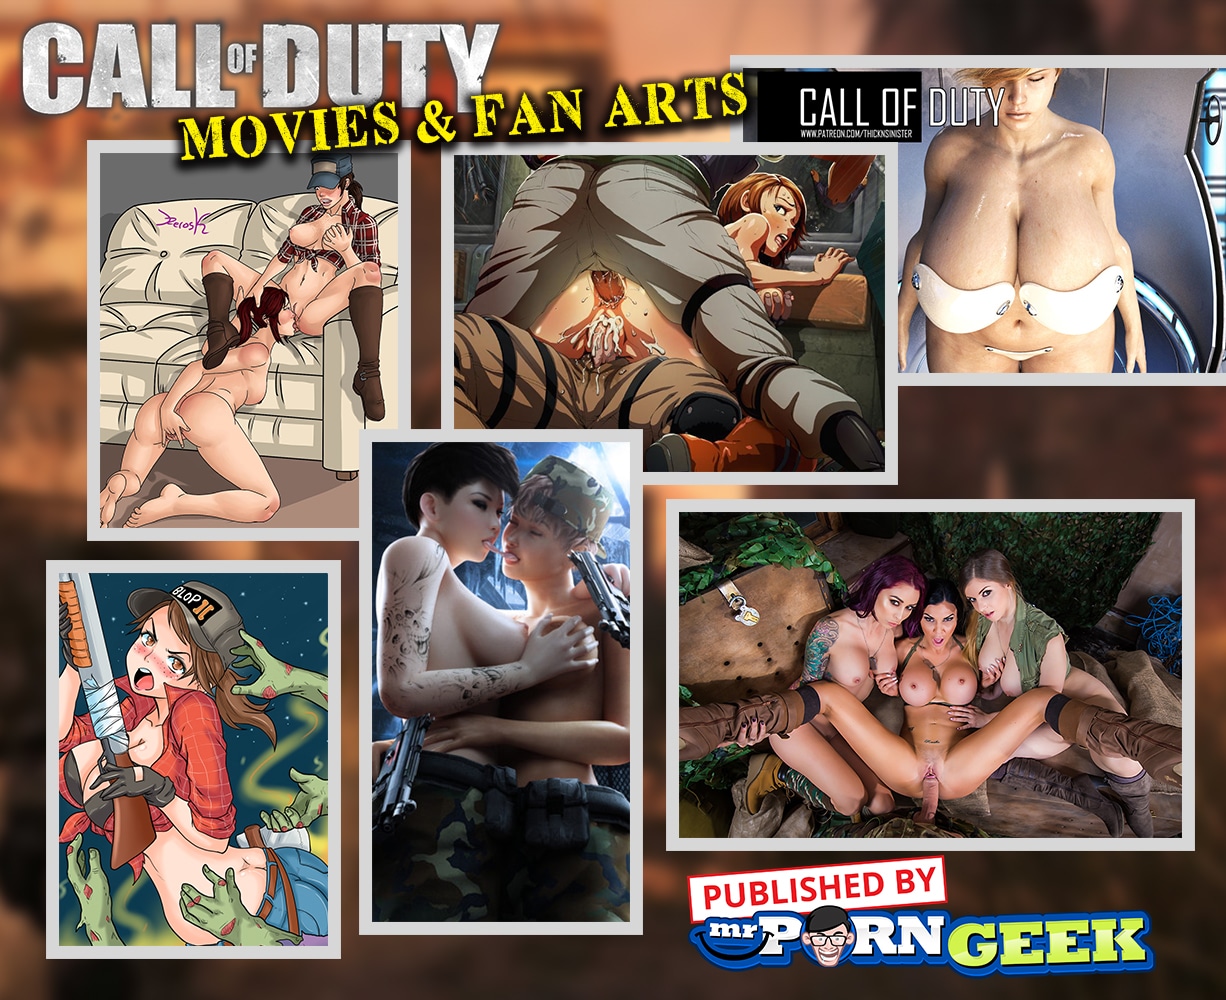 Free Porn Movie Arab Duty - Call Of Duty Porn Makes People Cum! Find It Here